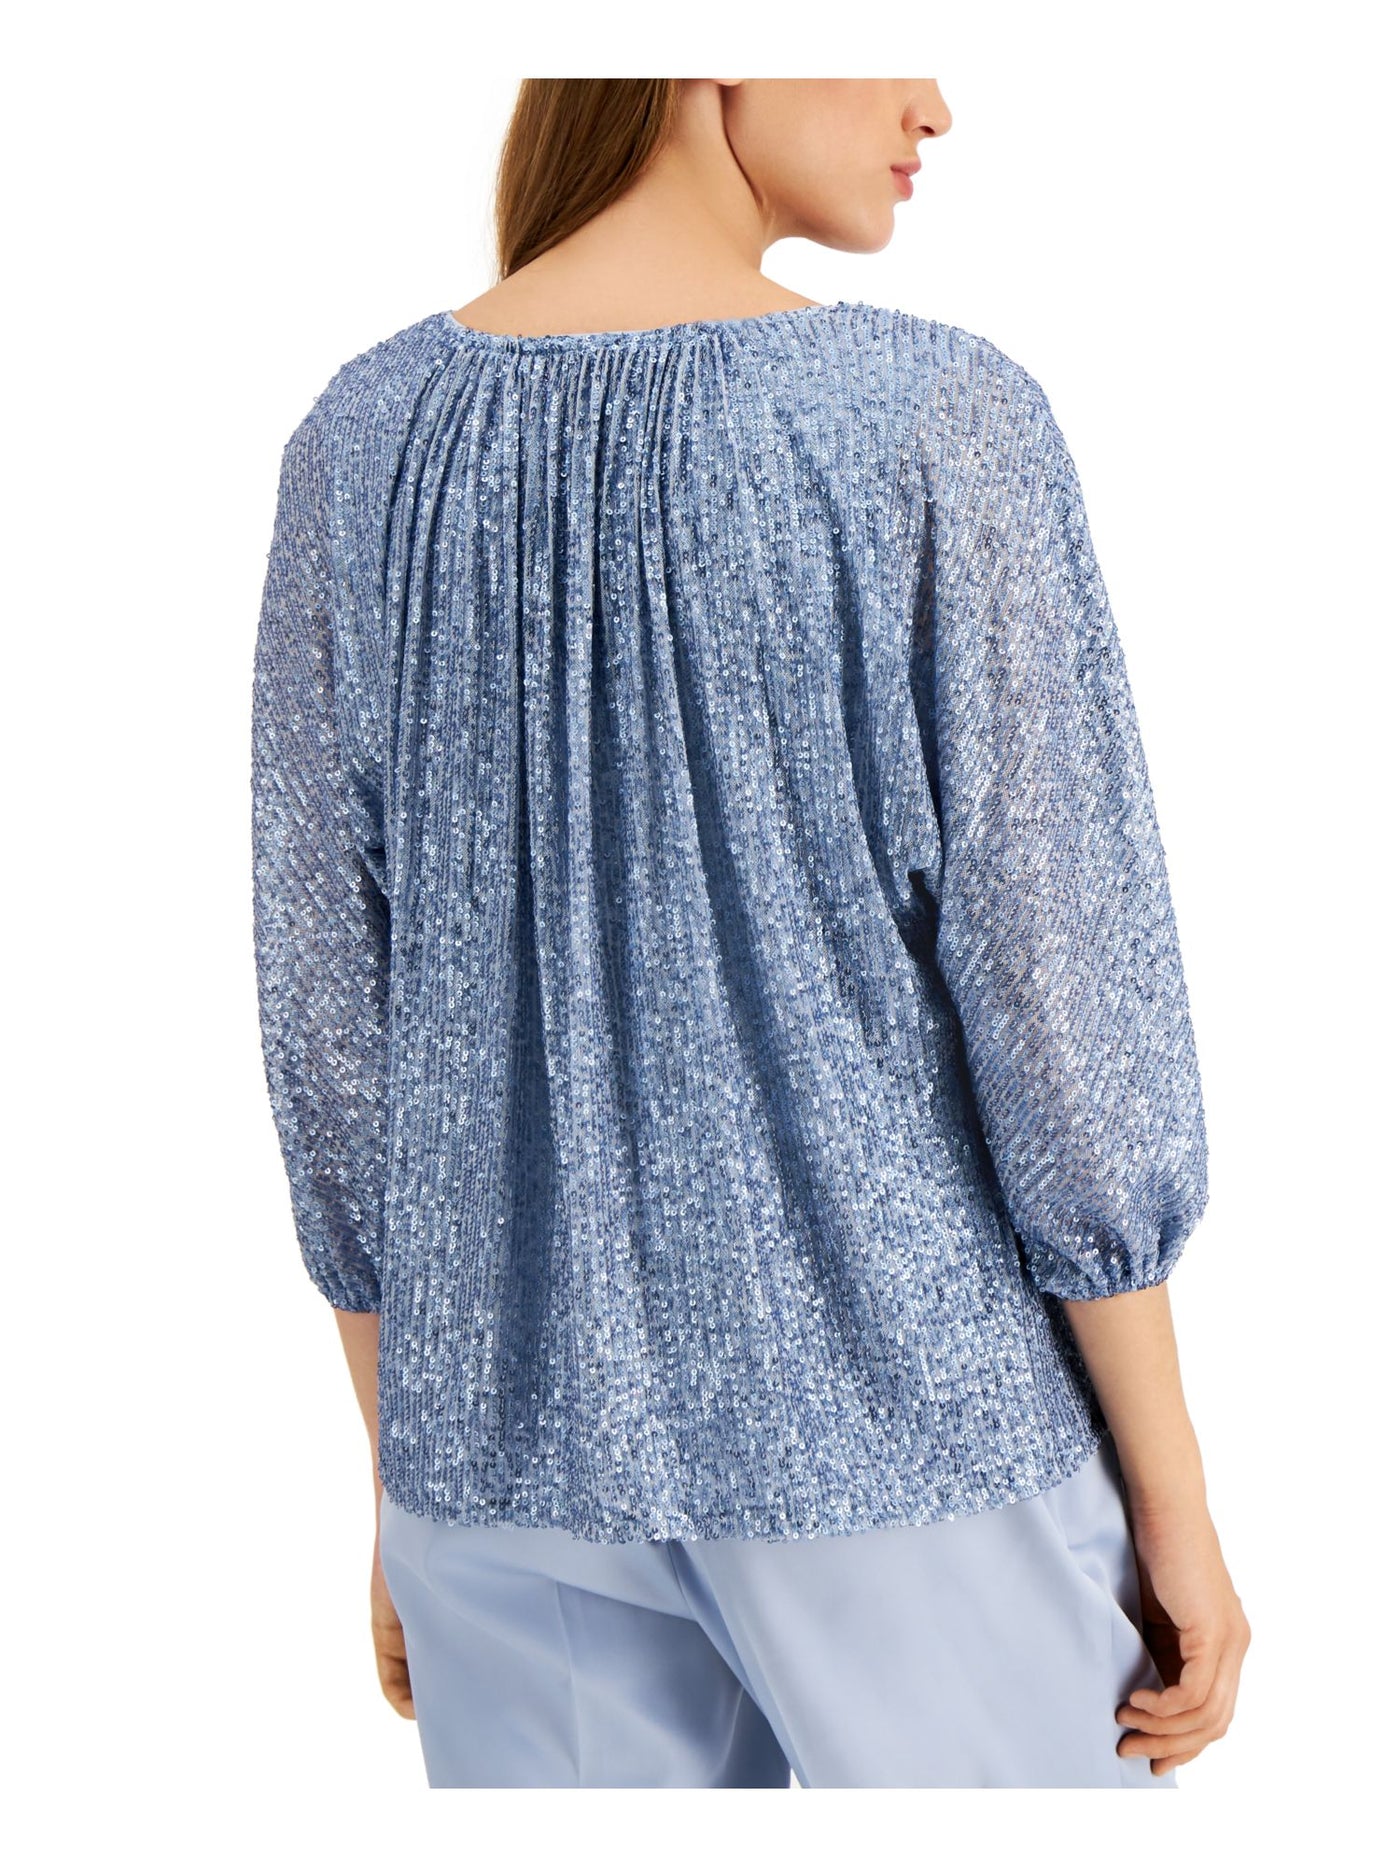 ALFANI Womens Light Blue Sequined Ruched 3/4 Sleeve Scoop Neck Peasant Top S